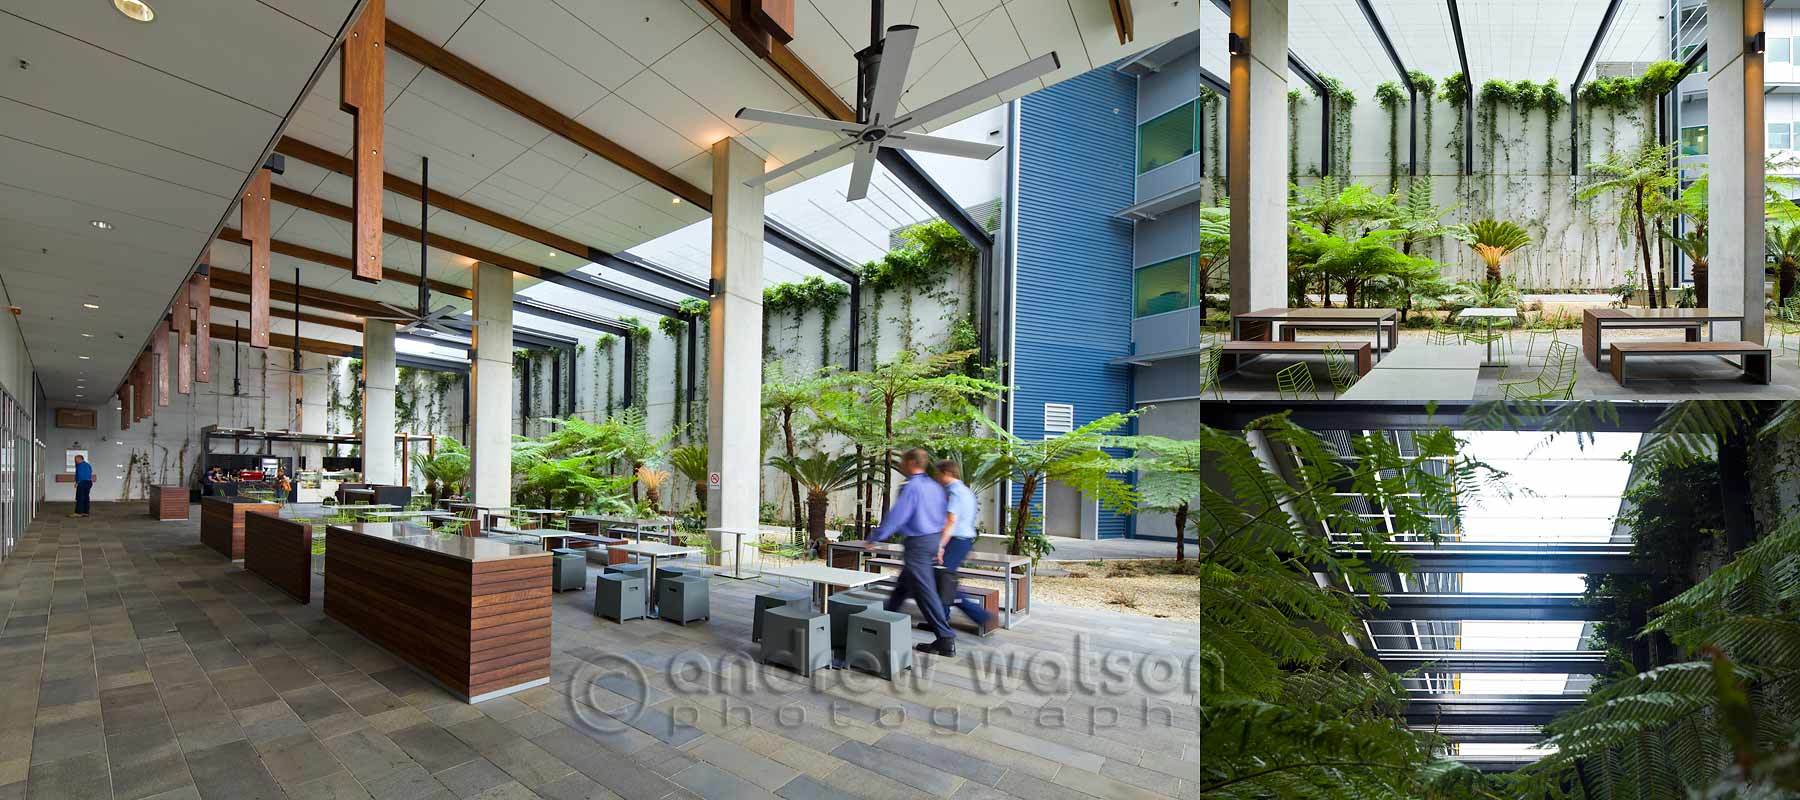 Architecture photography - William McCormack Building Courtyard, Cairns